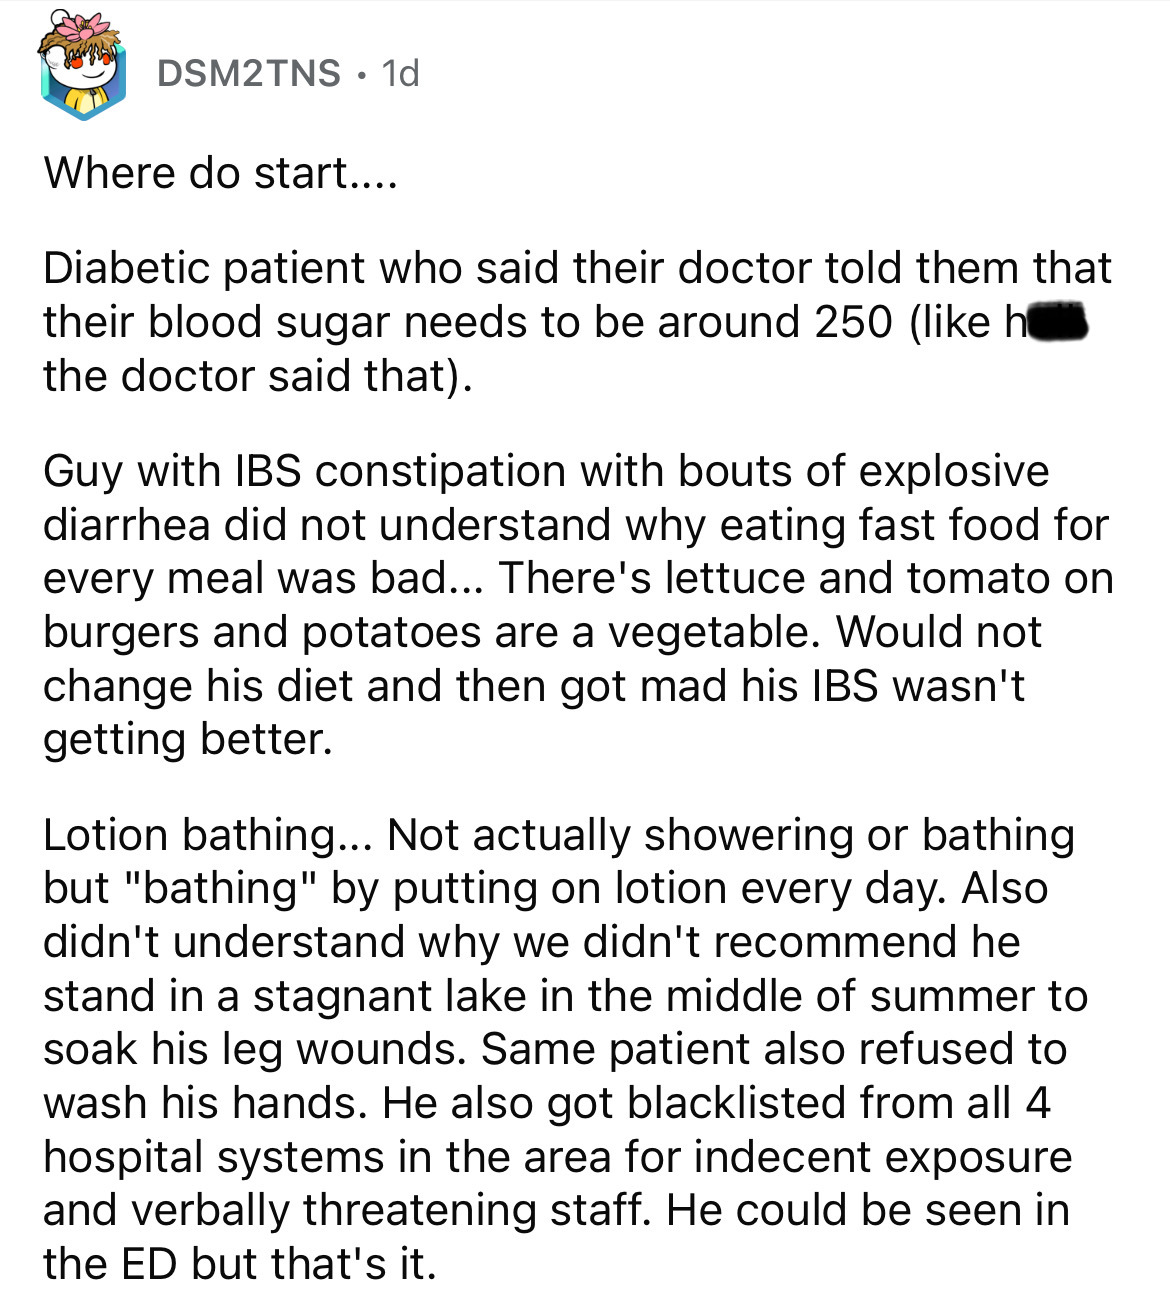 document - DSM2TNS. 1d Where do start.... Diabetic patient who said their doctor told them that their blood sugar needs to be around 250 h the doctor said that. Guy with Ibs constipation with bouts of explosive diarrhea did not understand why eating fast 